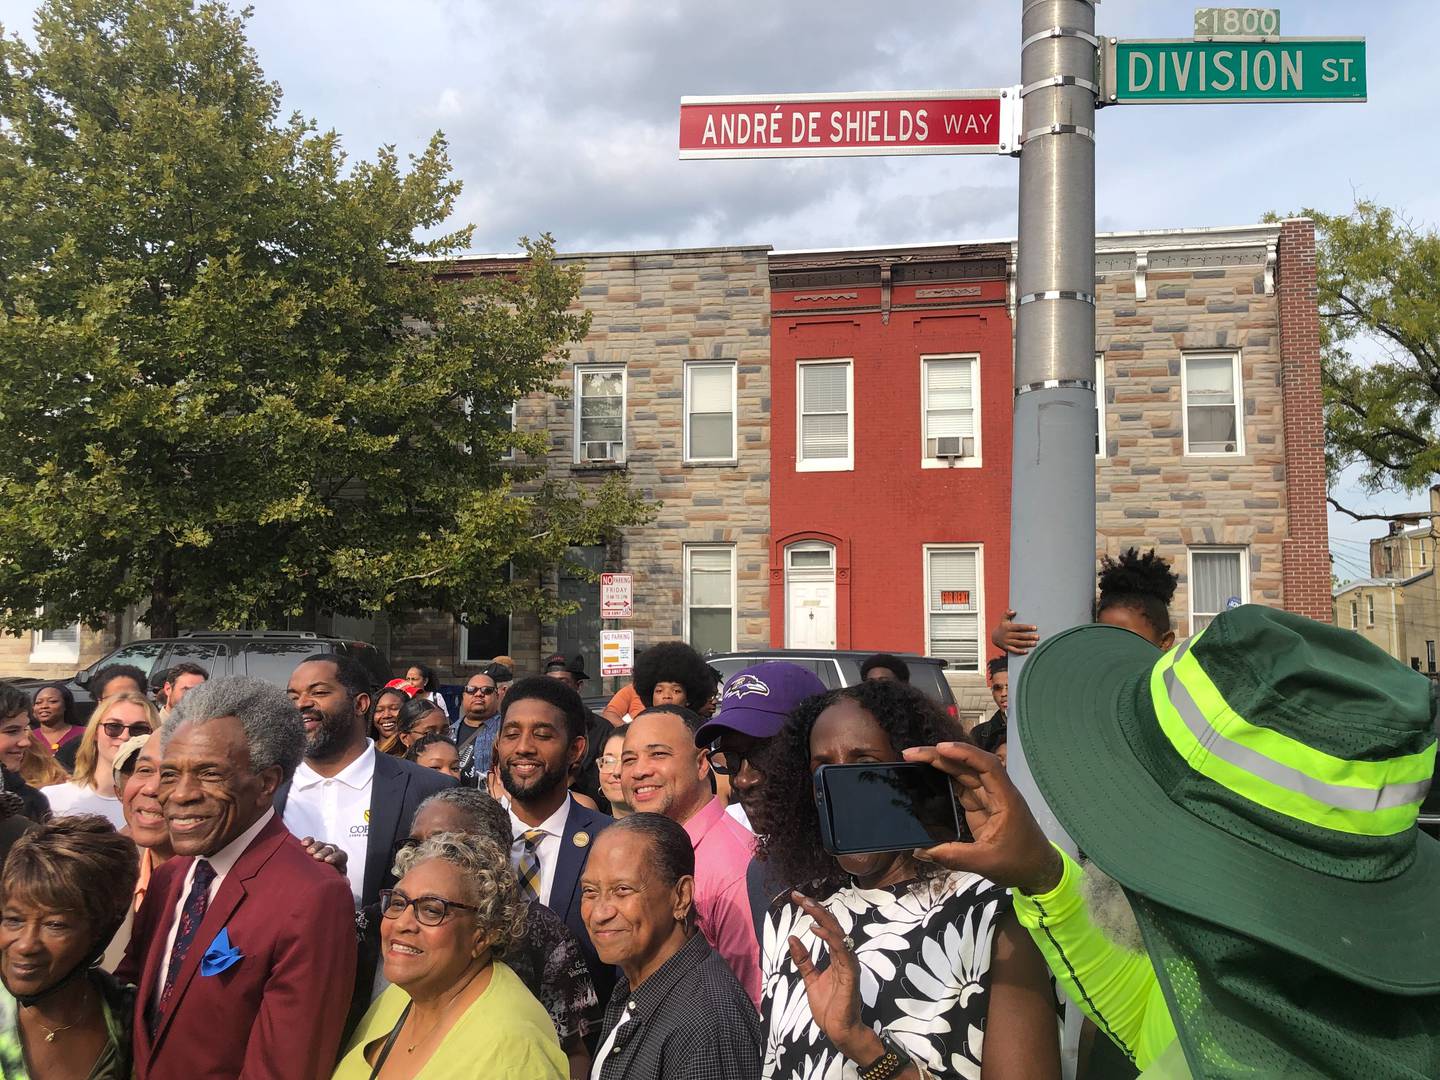 Andre De Shields, dressed in a slim cut crimson suit, was in Baltimore Thursday as the 1800 block of Division Street in the Upton neighborhood where he grew up, was renamed in his honor.